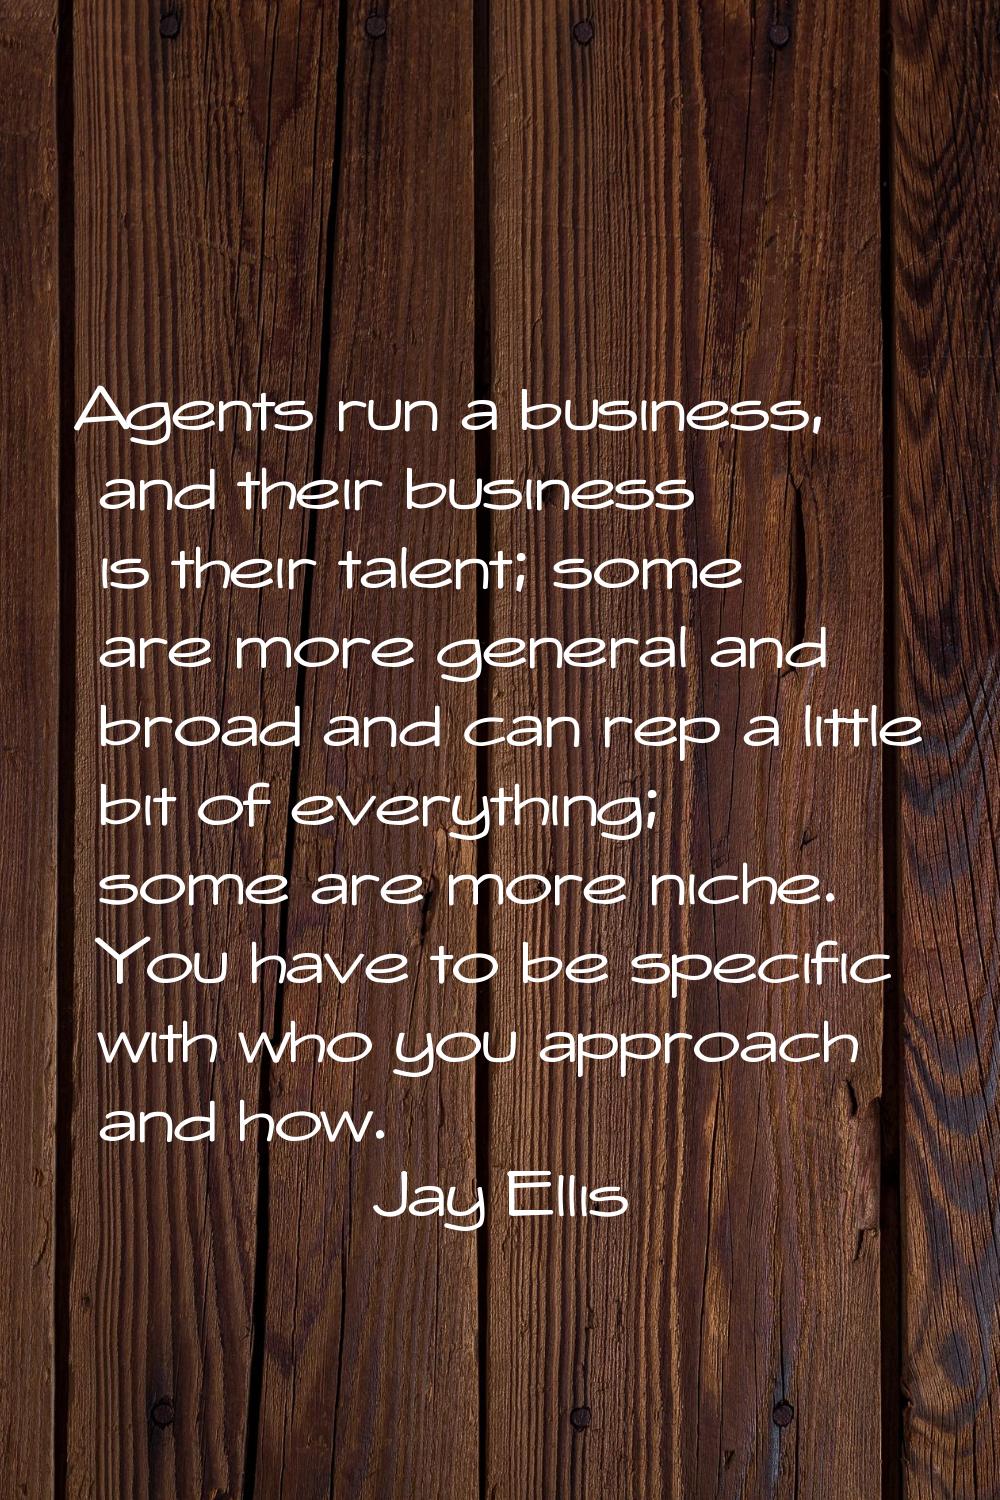 Agents run a business, and their business is their talent; some are more general and broad and can 